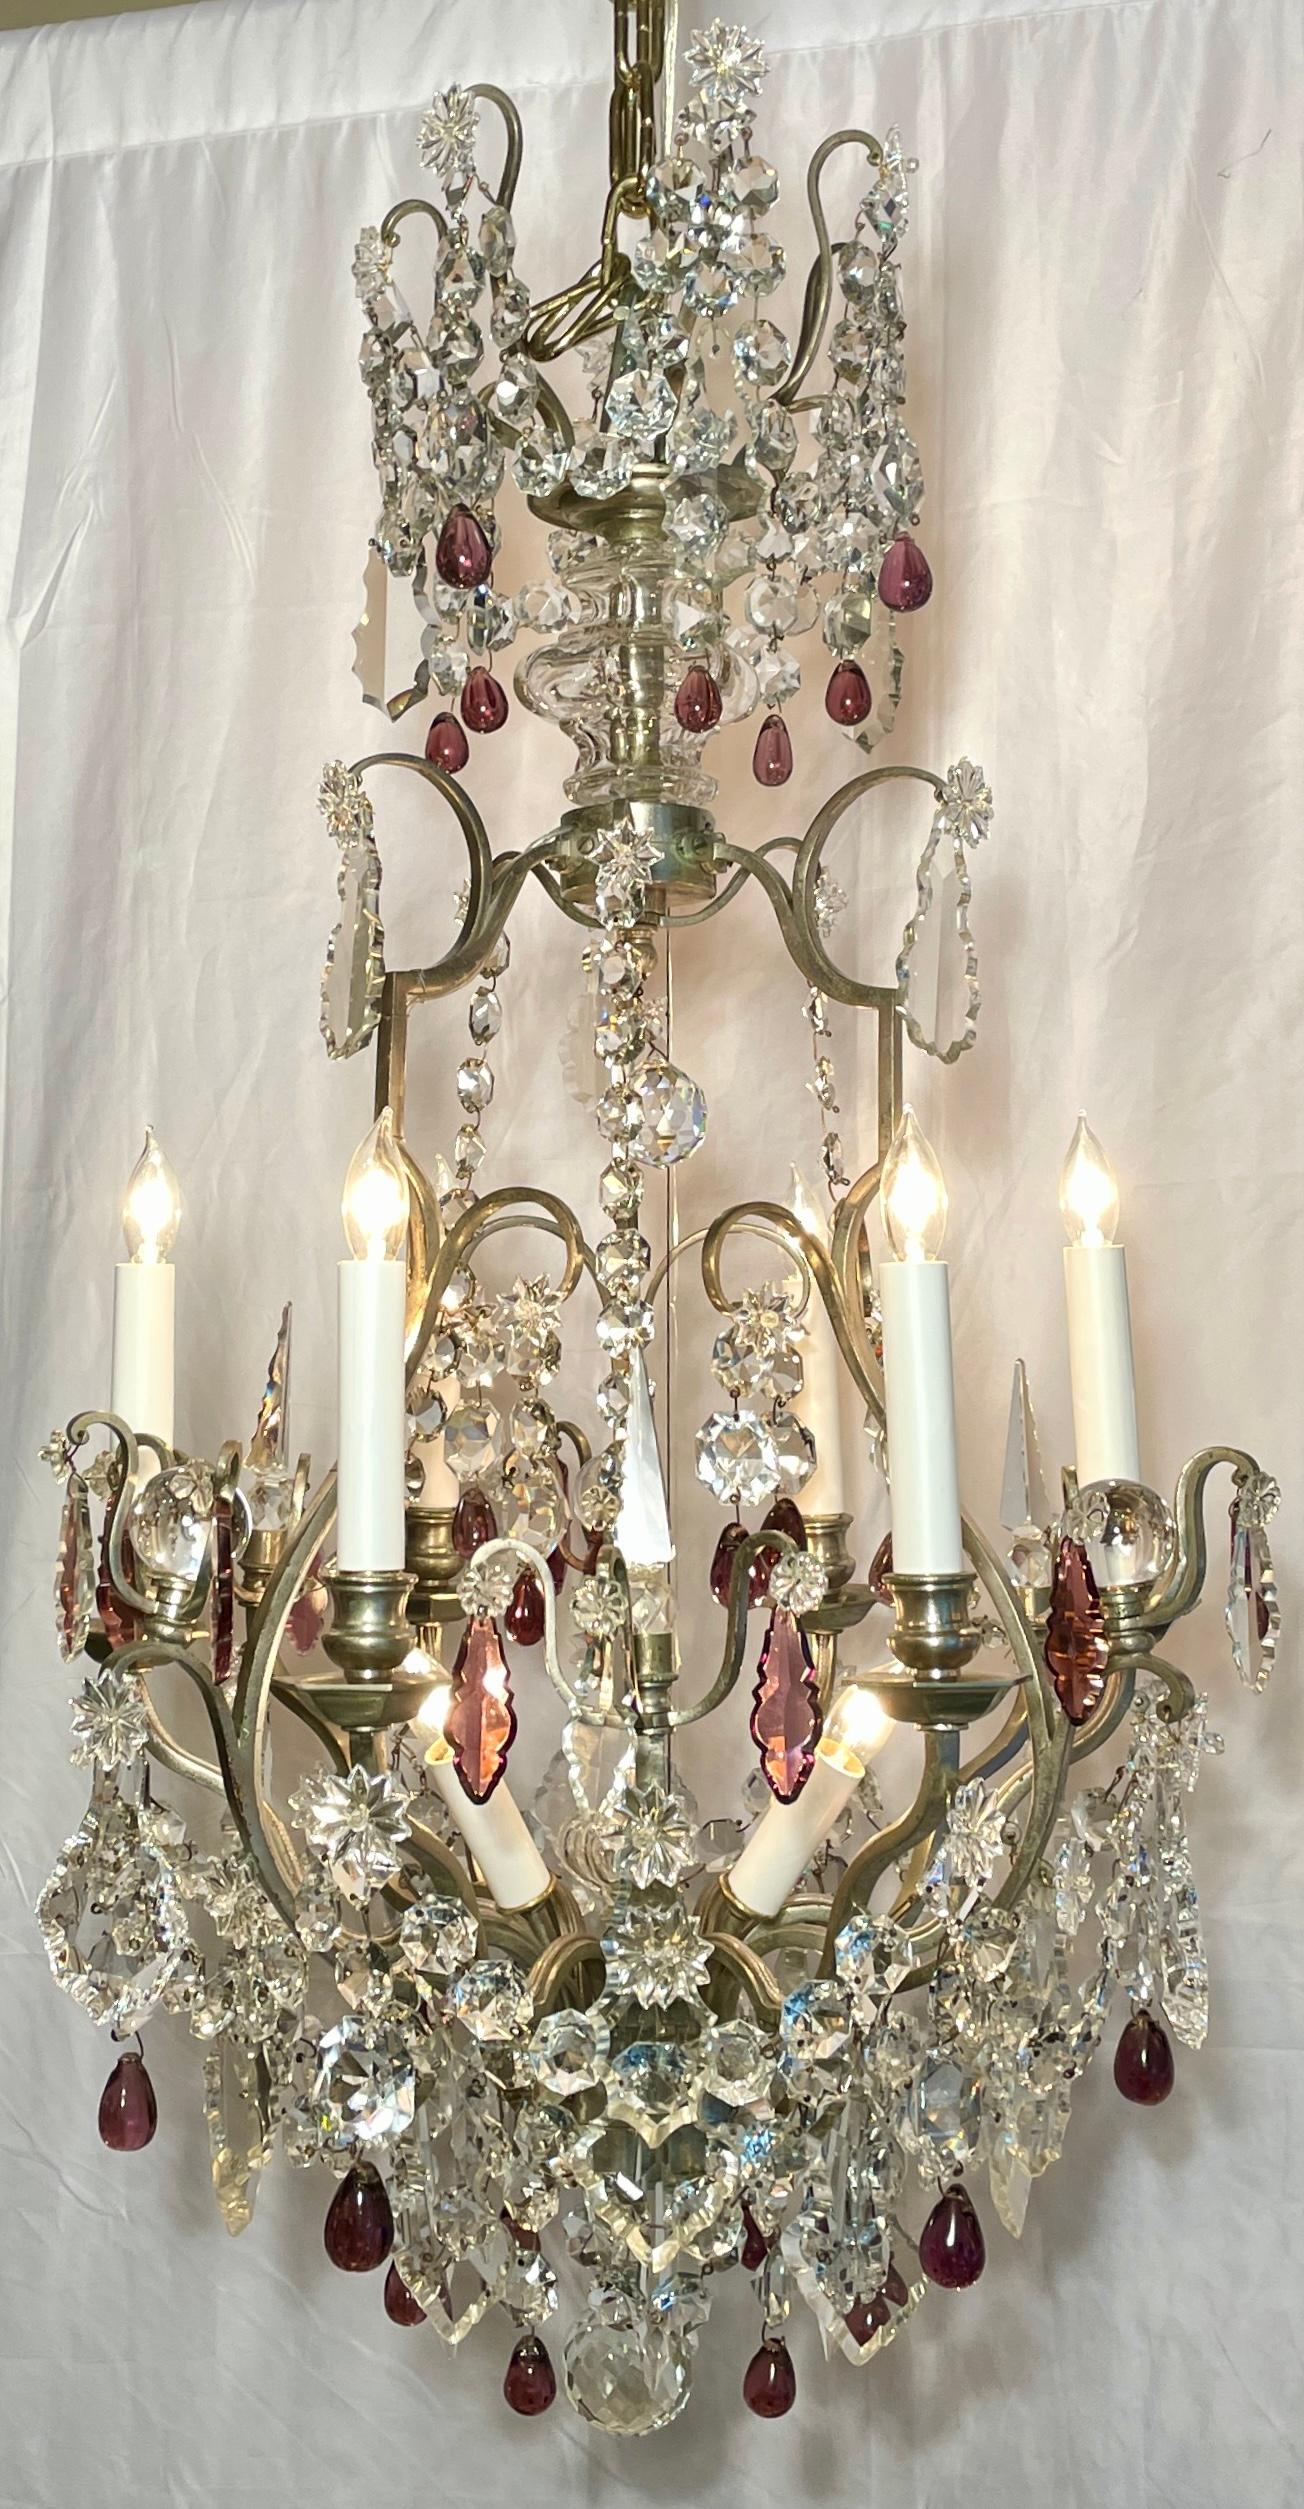 Antique French fine crystal and silver on bronze 9-light chandelier, circa 1890-1910. Cut crystal prisms in clear and purple hues.